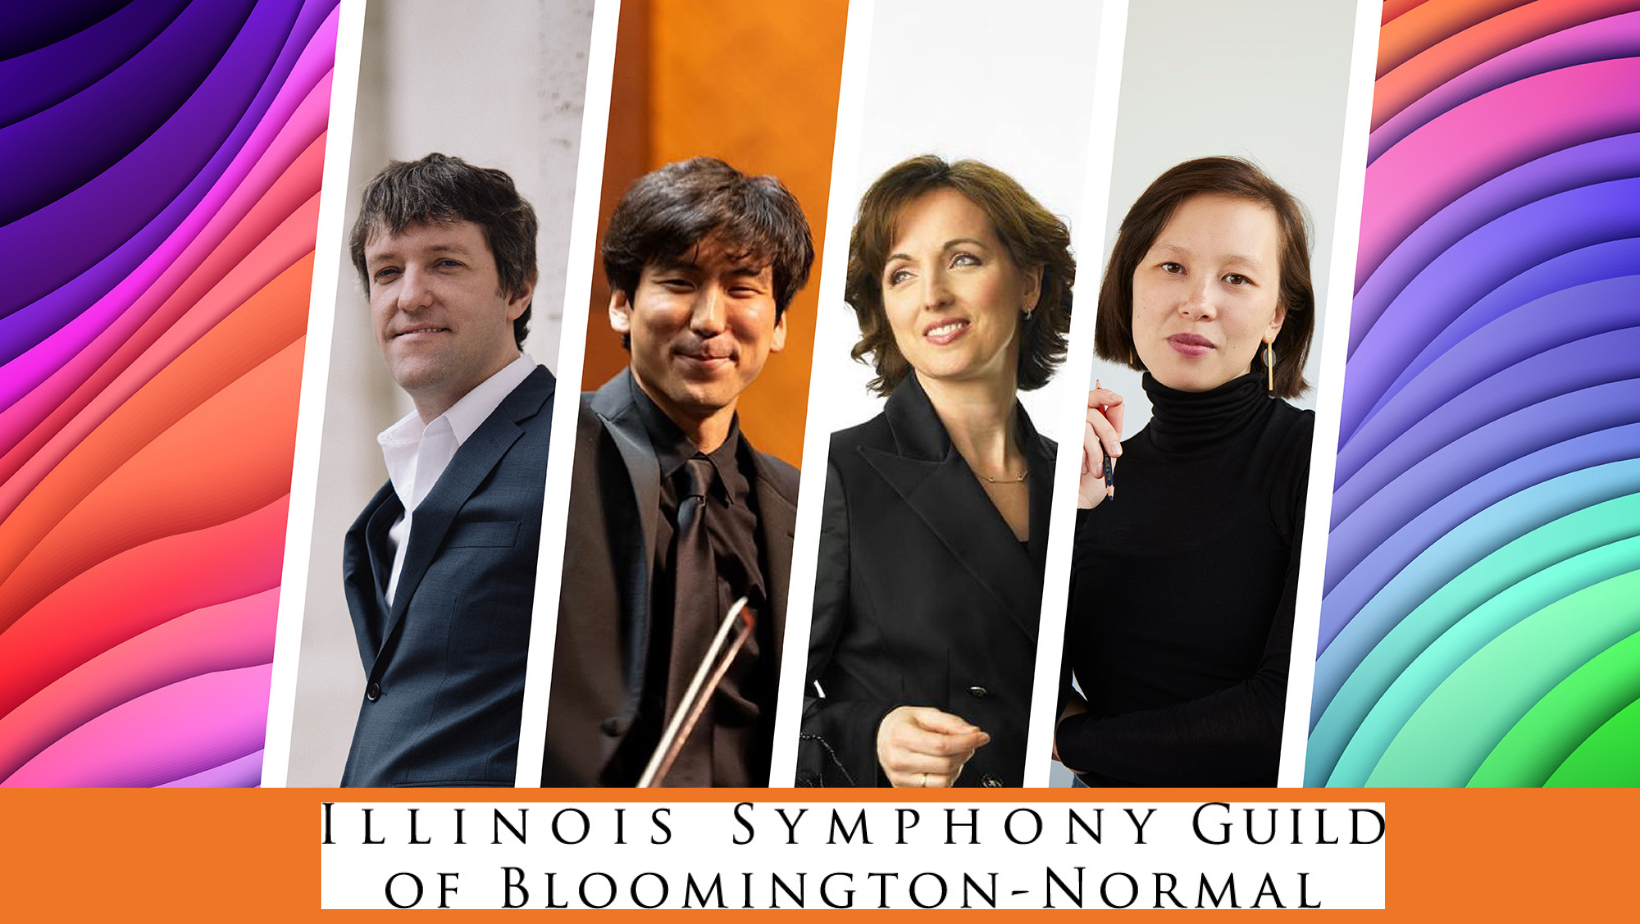 Illinois Symphony Guild of Bloomington-Normal: Concert Chats with Taichi Fukumura